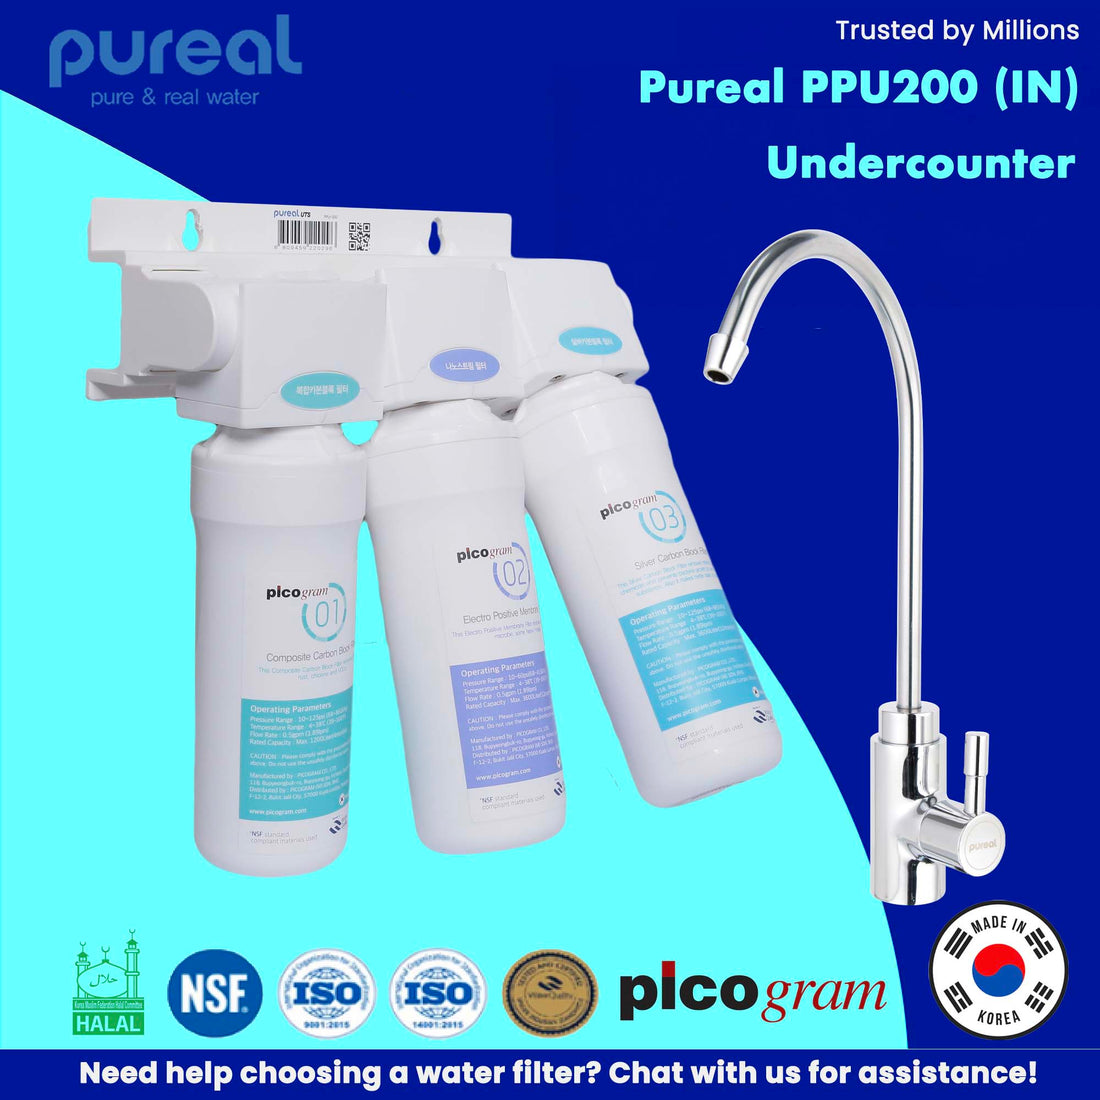 (Limited time! FREE Basic Installation!) PPU200 UTS UnderSink Water Purifier